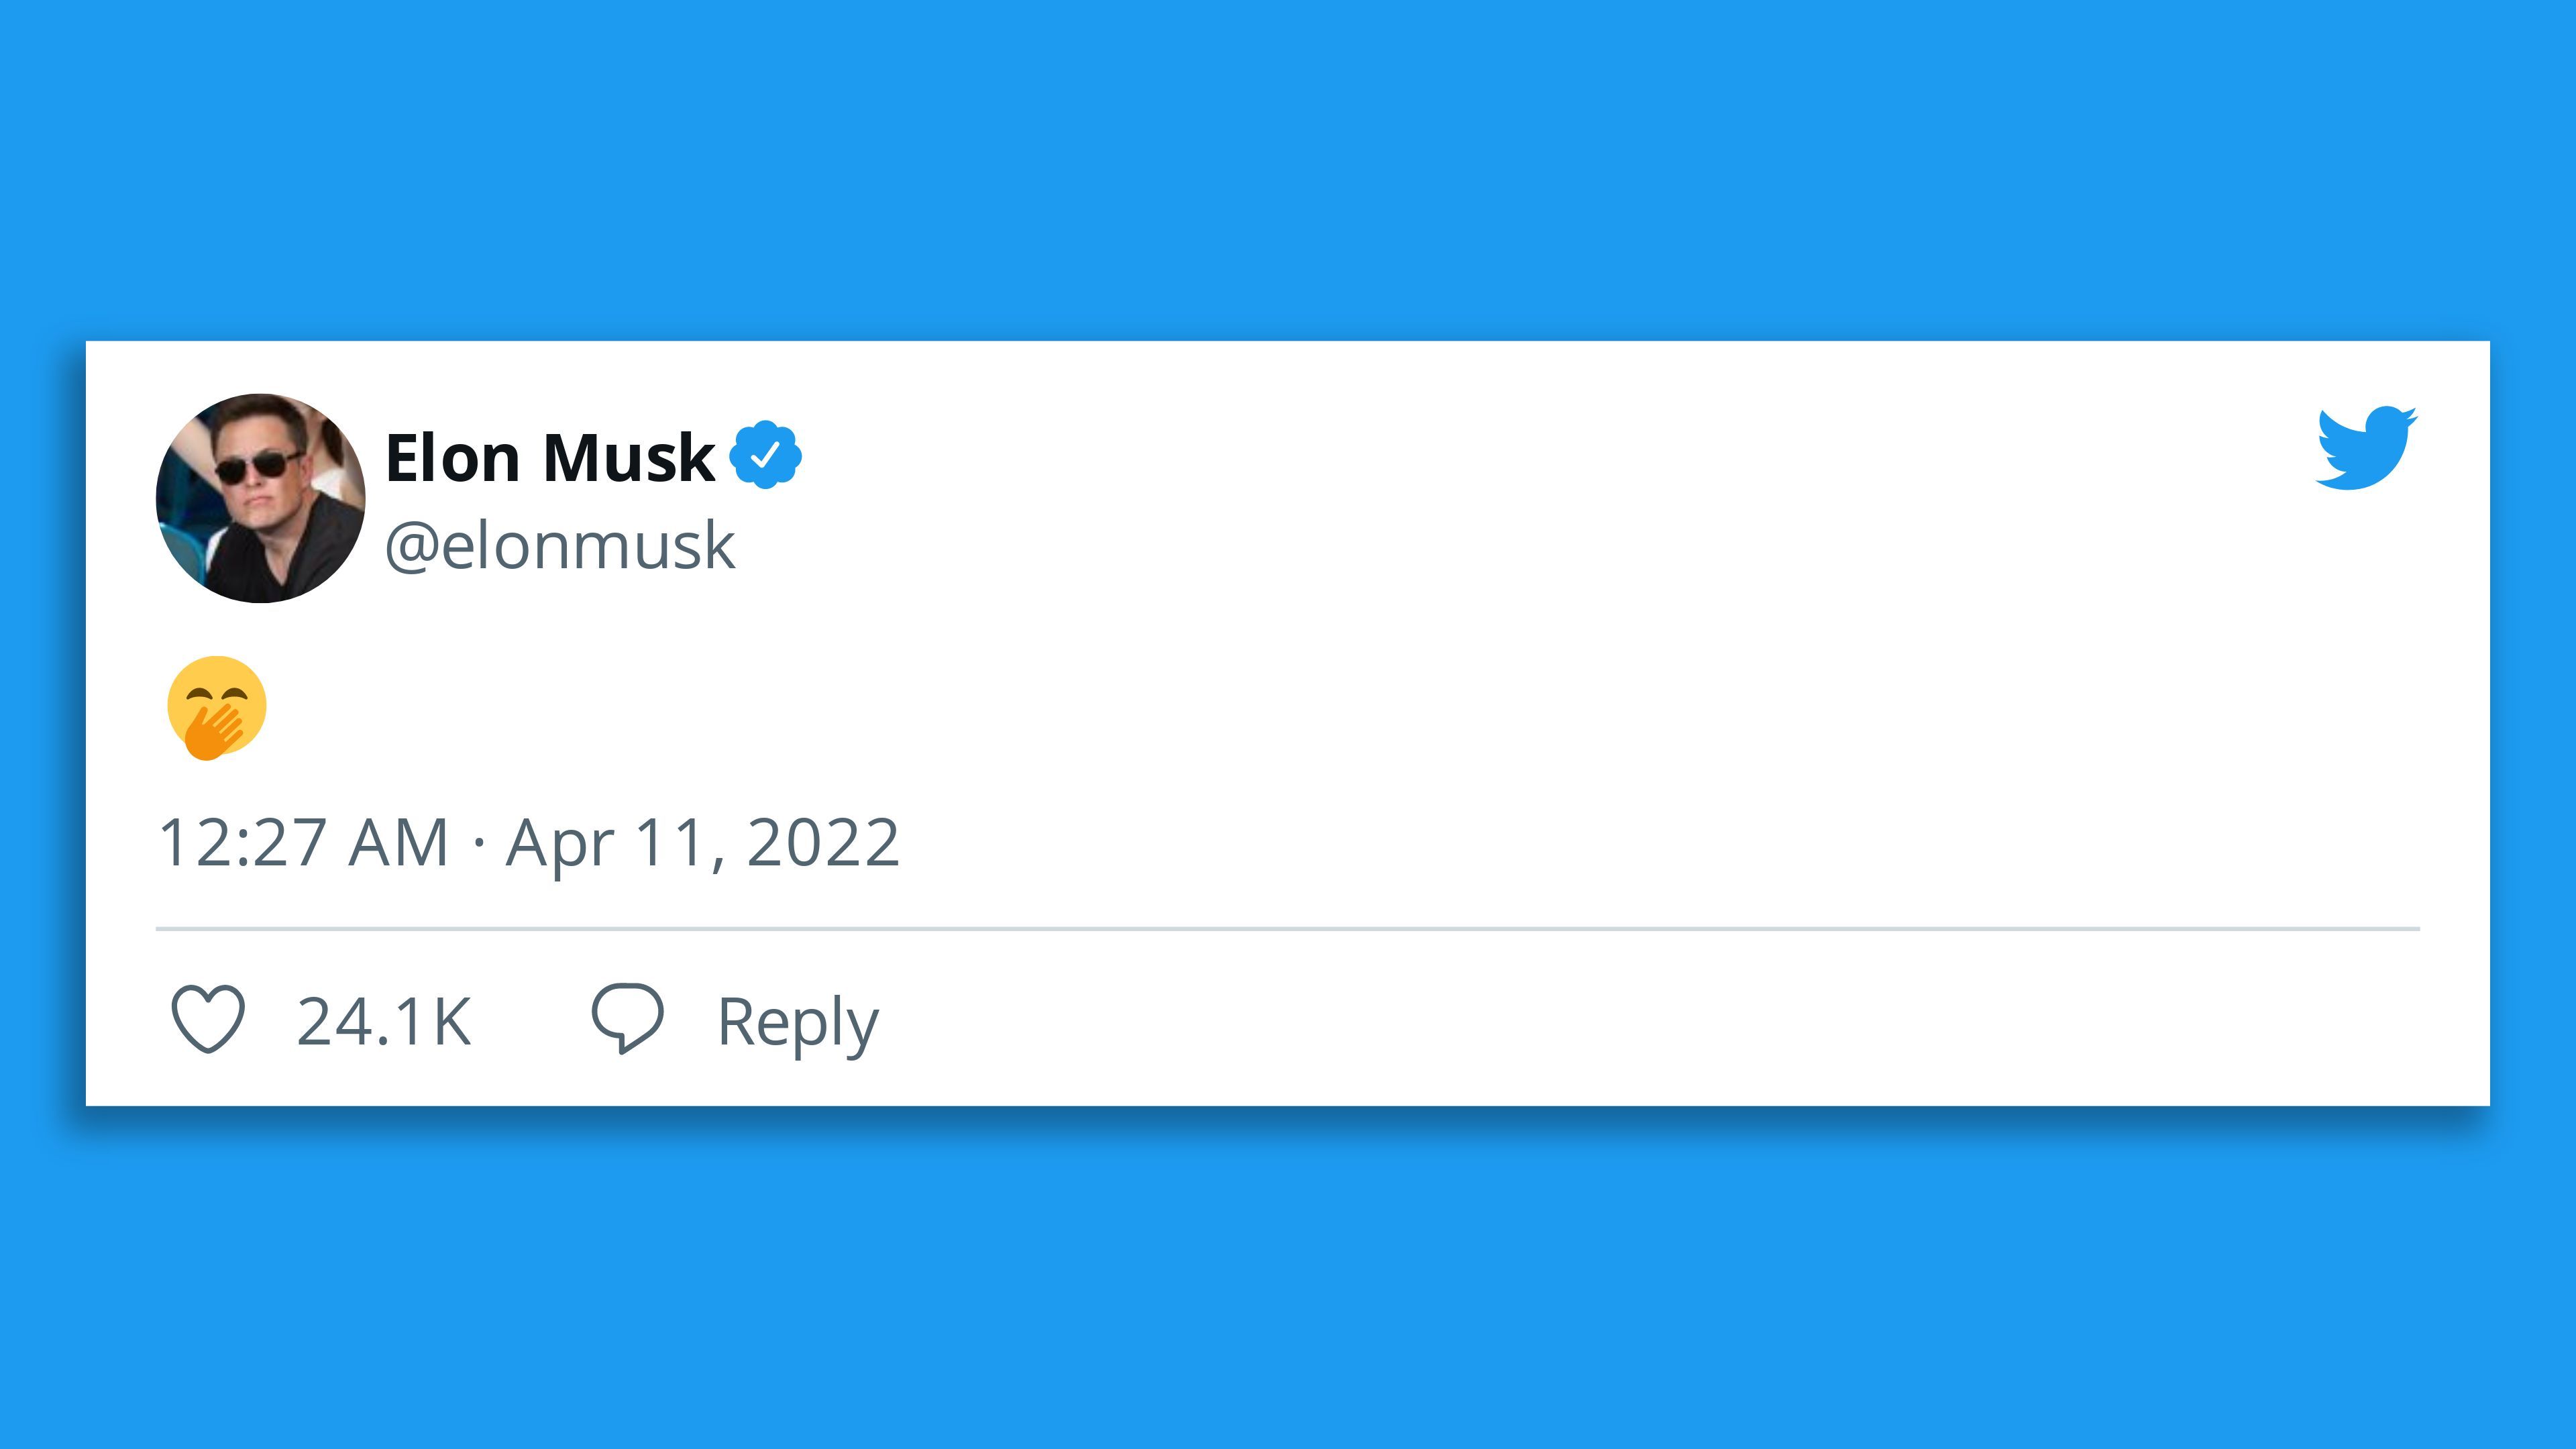 Elon Musk's tweet of a face emoji with the hand over its mouth.